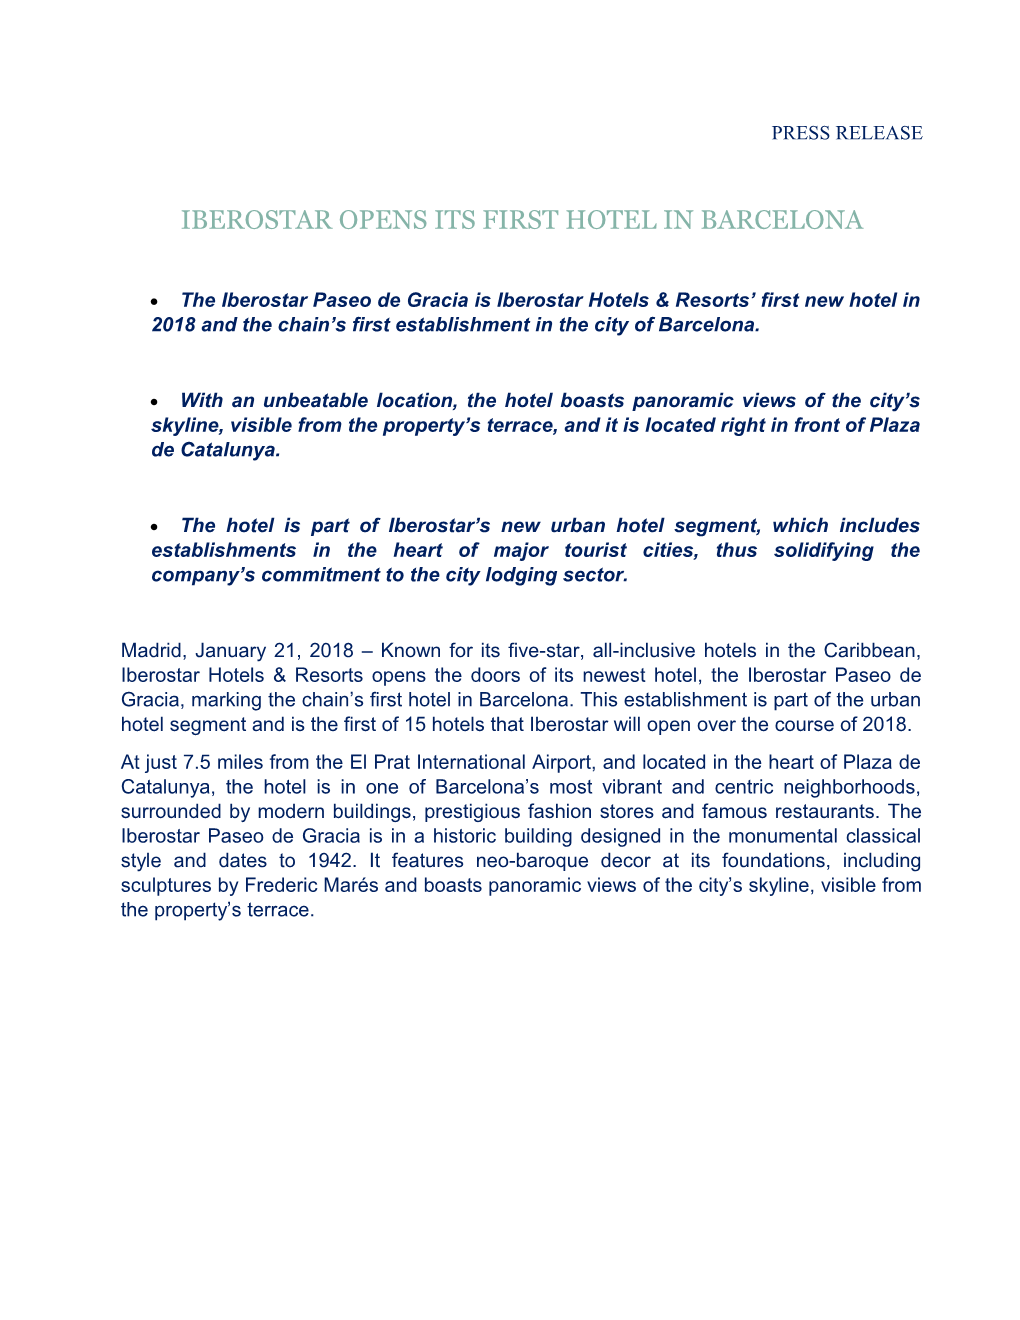 Iberostar Opens Its First Hotel in Barcelona